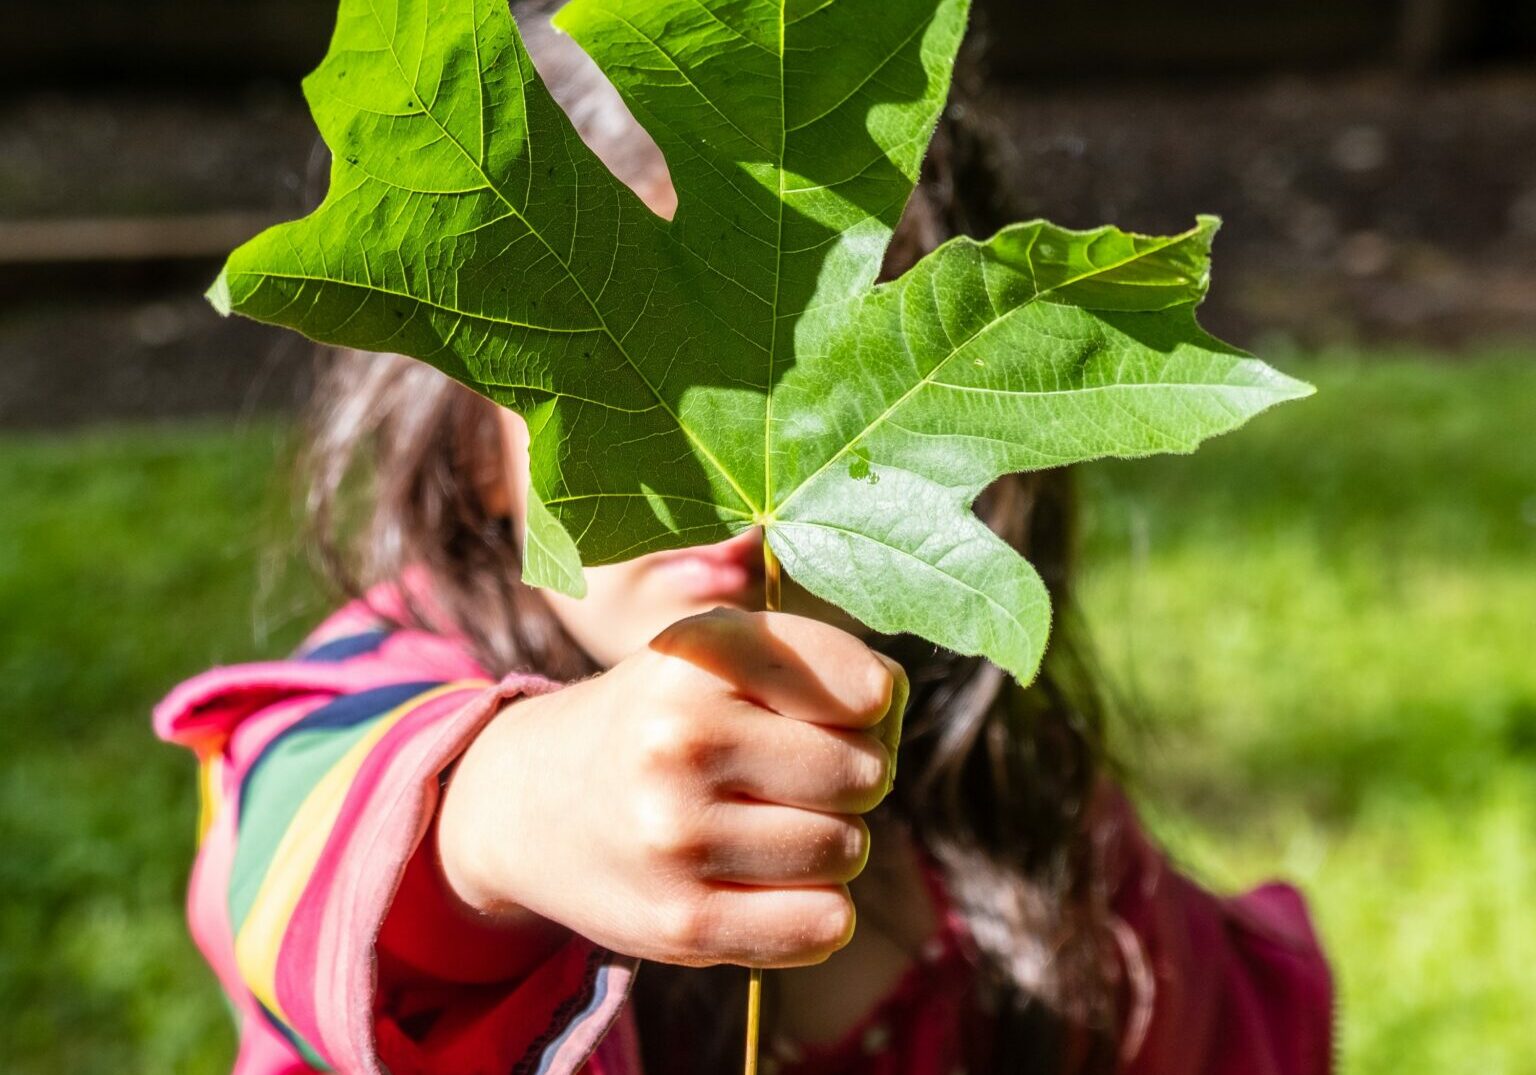 A child holding a large green leaf in front of its face